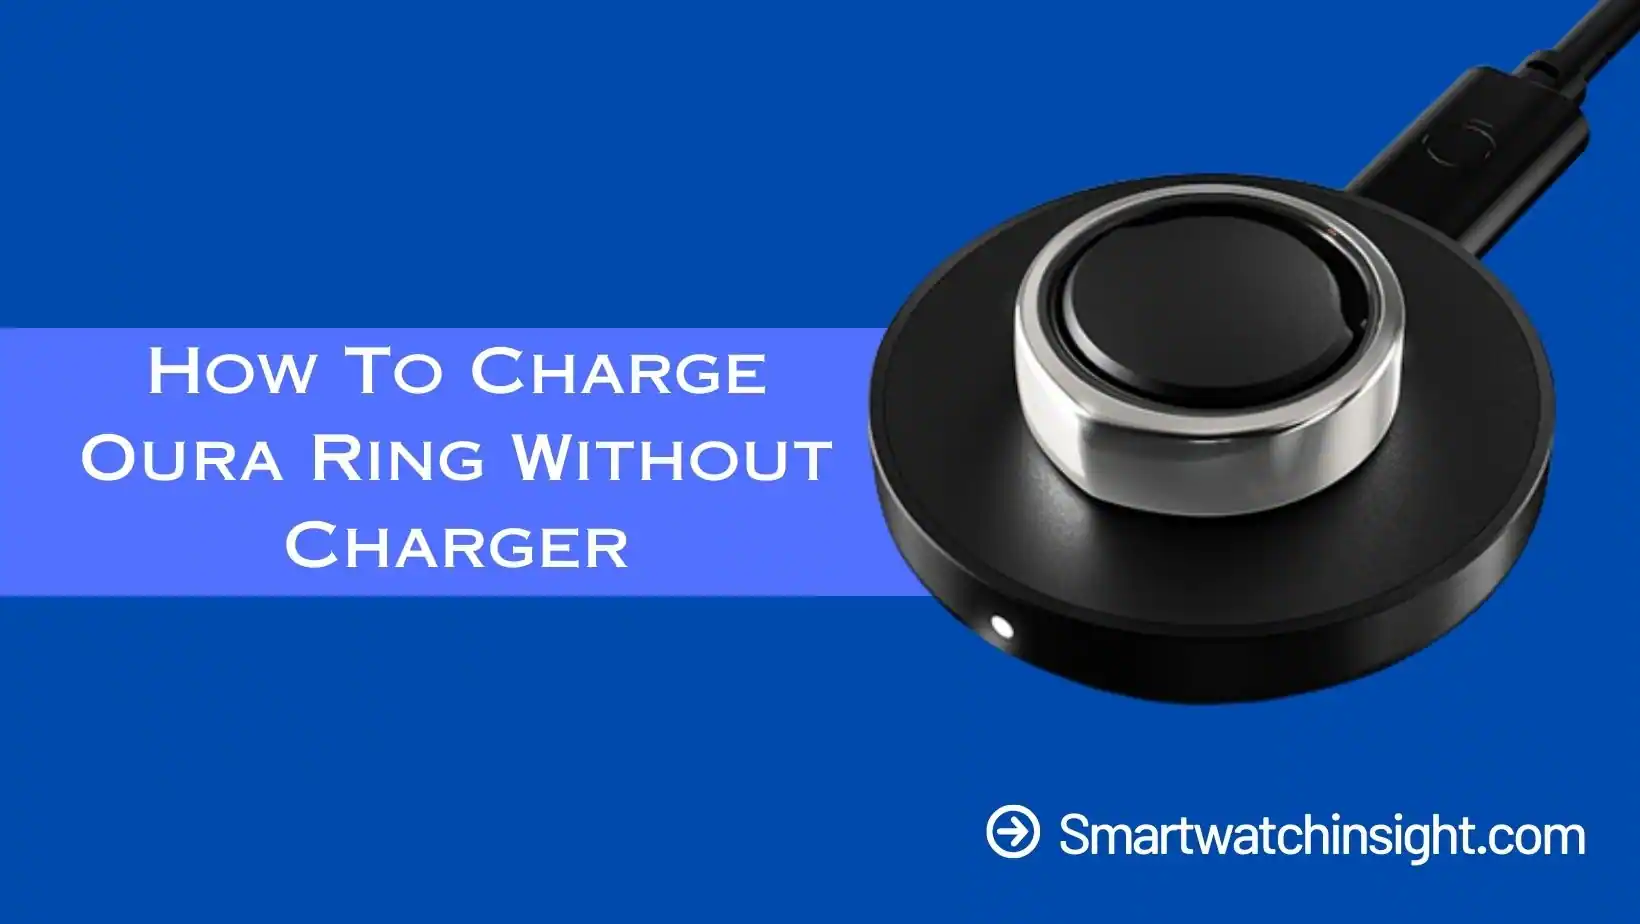 How To Charge Oura Ring Without Charger?